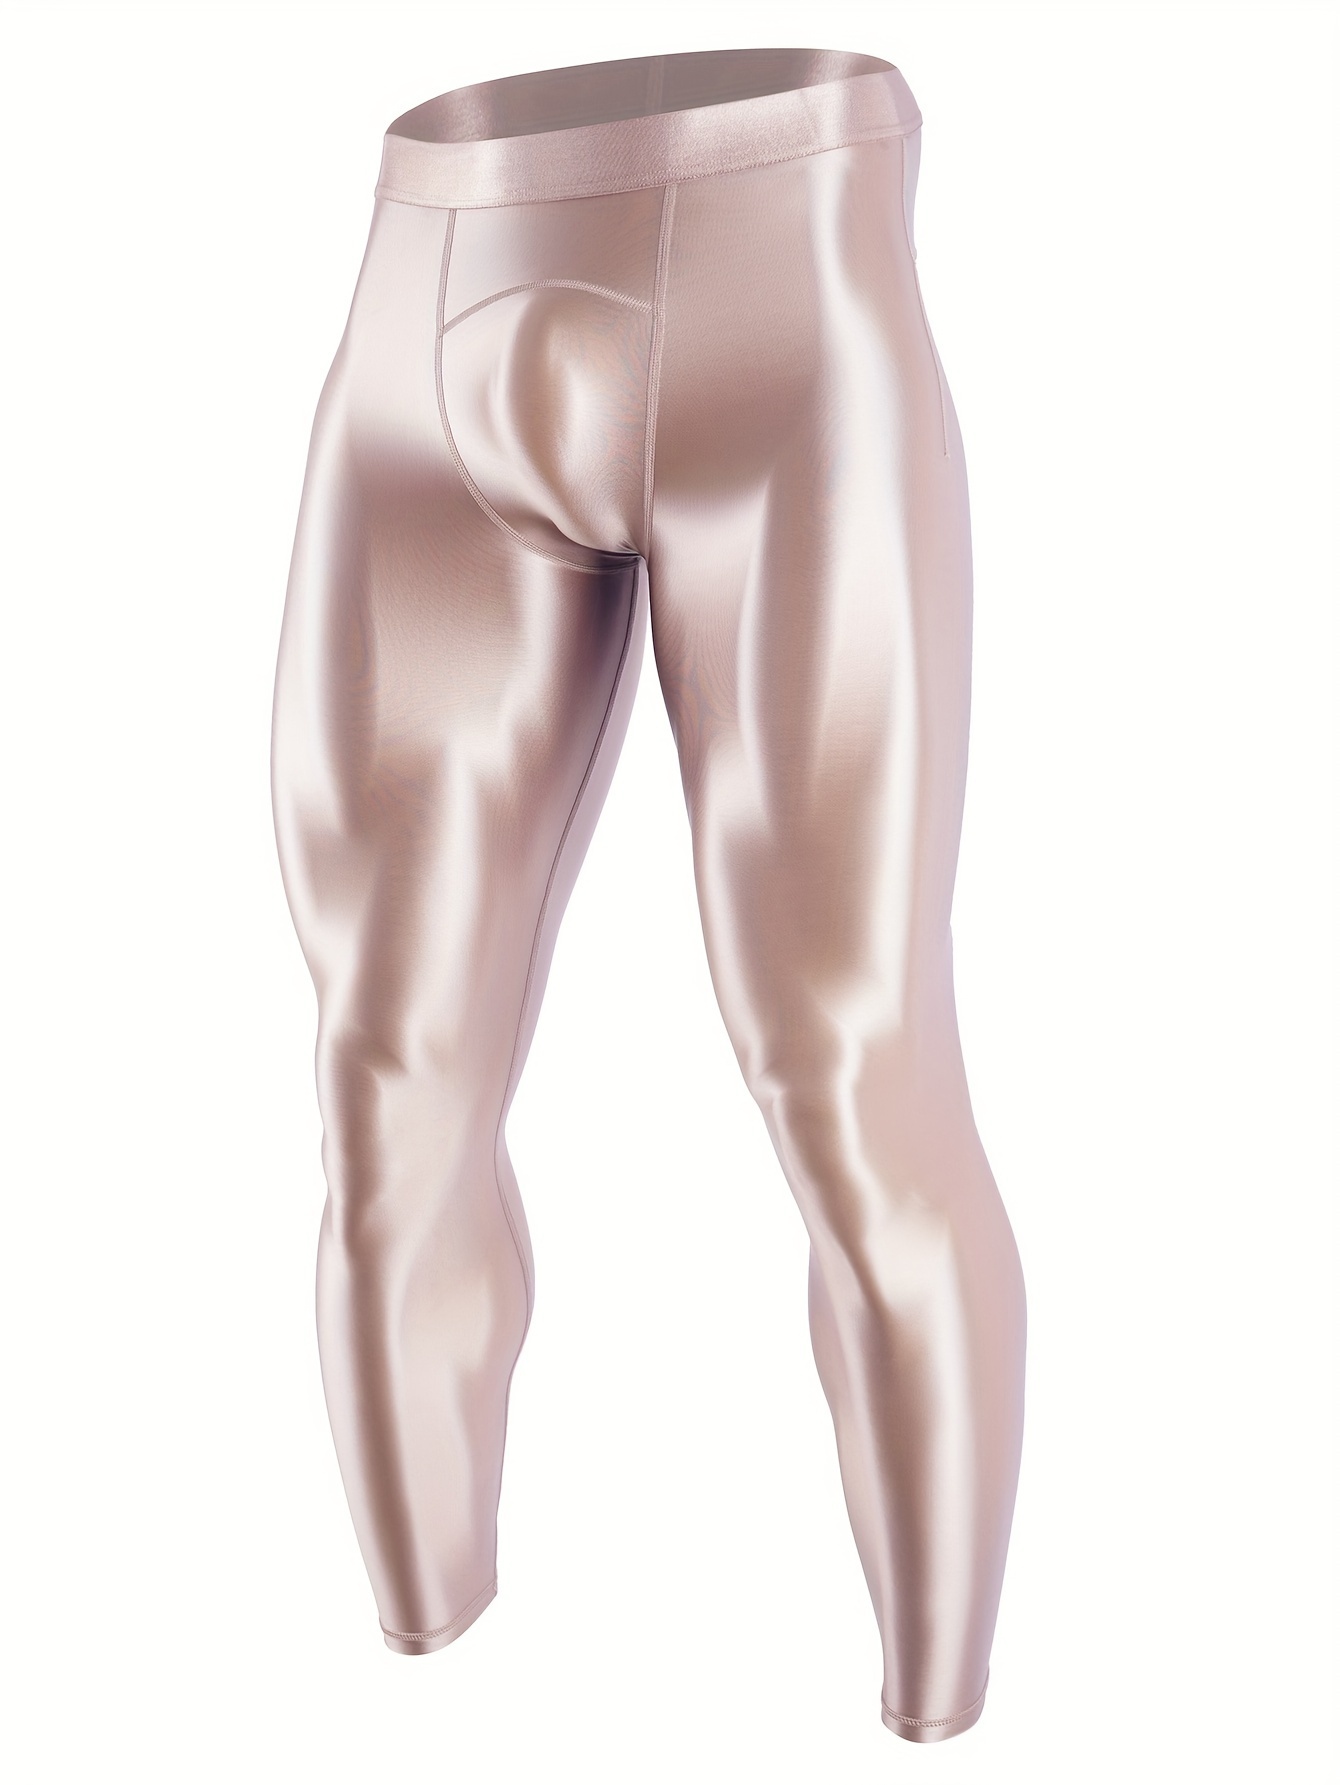 Oil Shiny Mens Bulge Pouch Gym Mens 3 4 Tights Sexy Shpaewear Leggings For  Men With Smooth Pencil Fit From Benedetto, $15.48